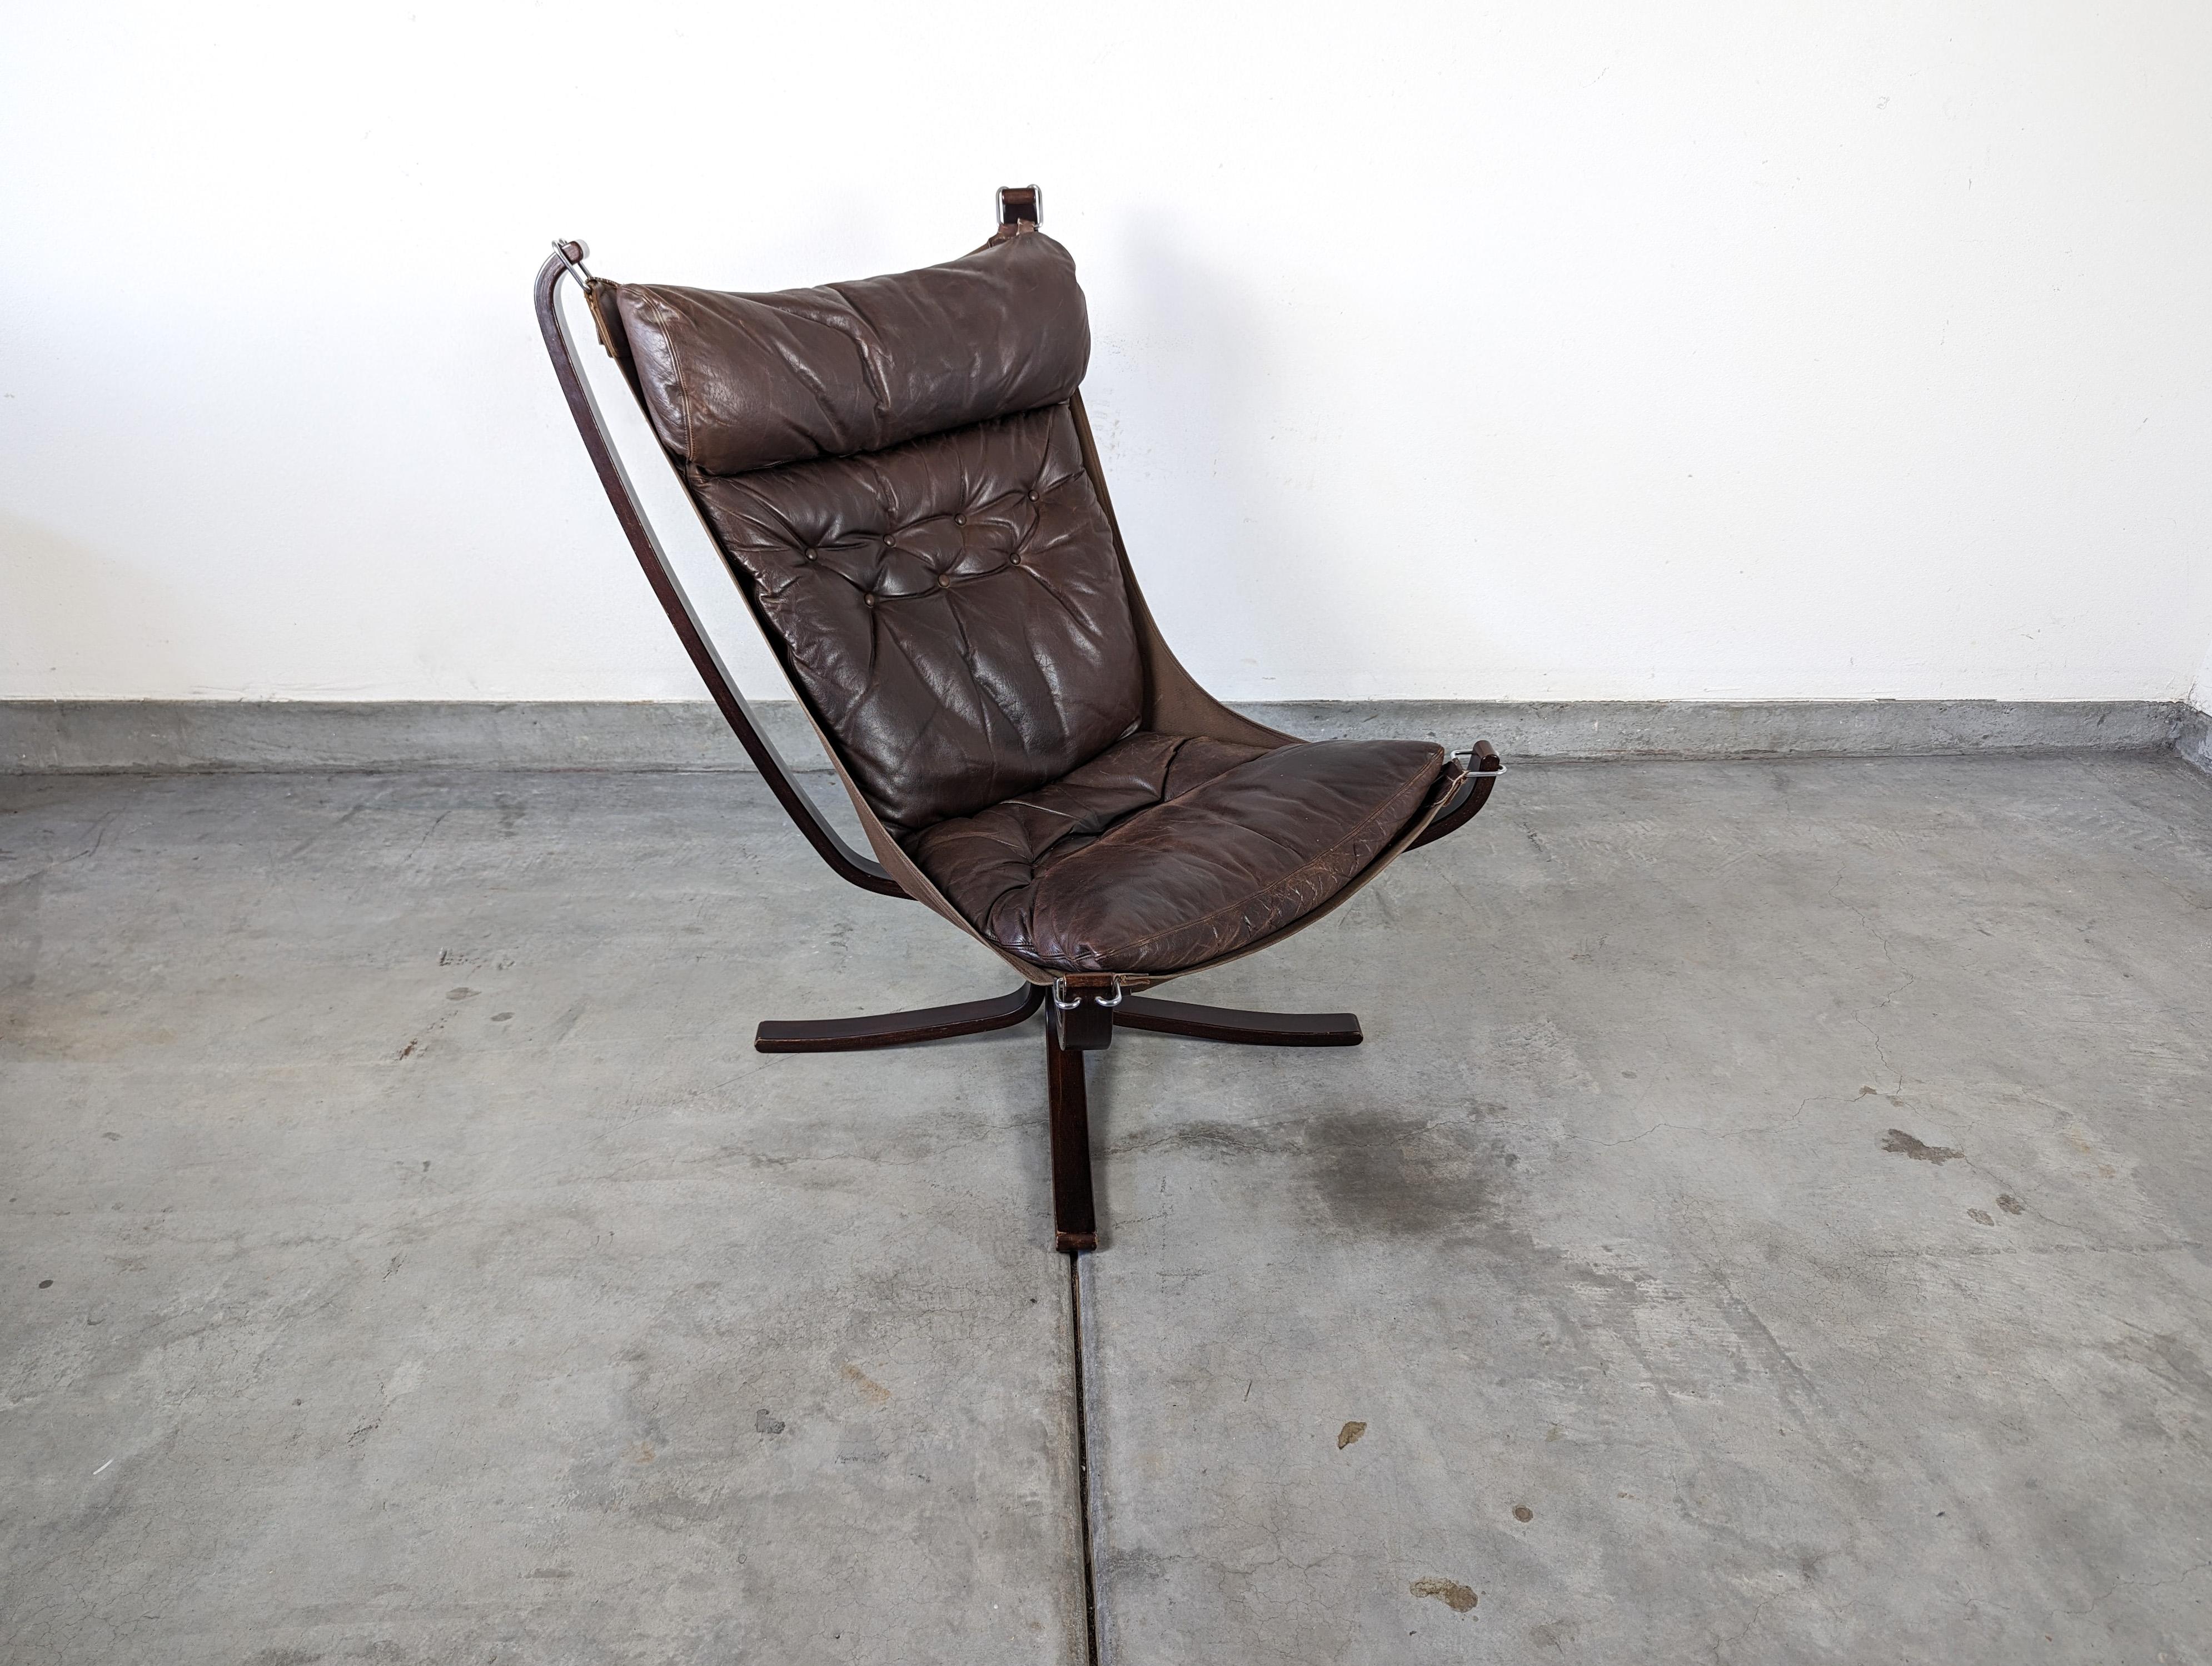 Late 20th Century Mid Century Modern Falcon Chair by Sigurd Resell for Vatne Mobler, c1970s